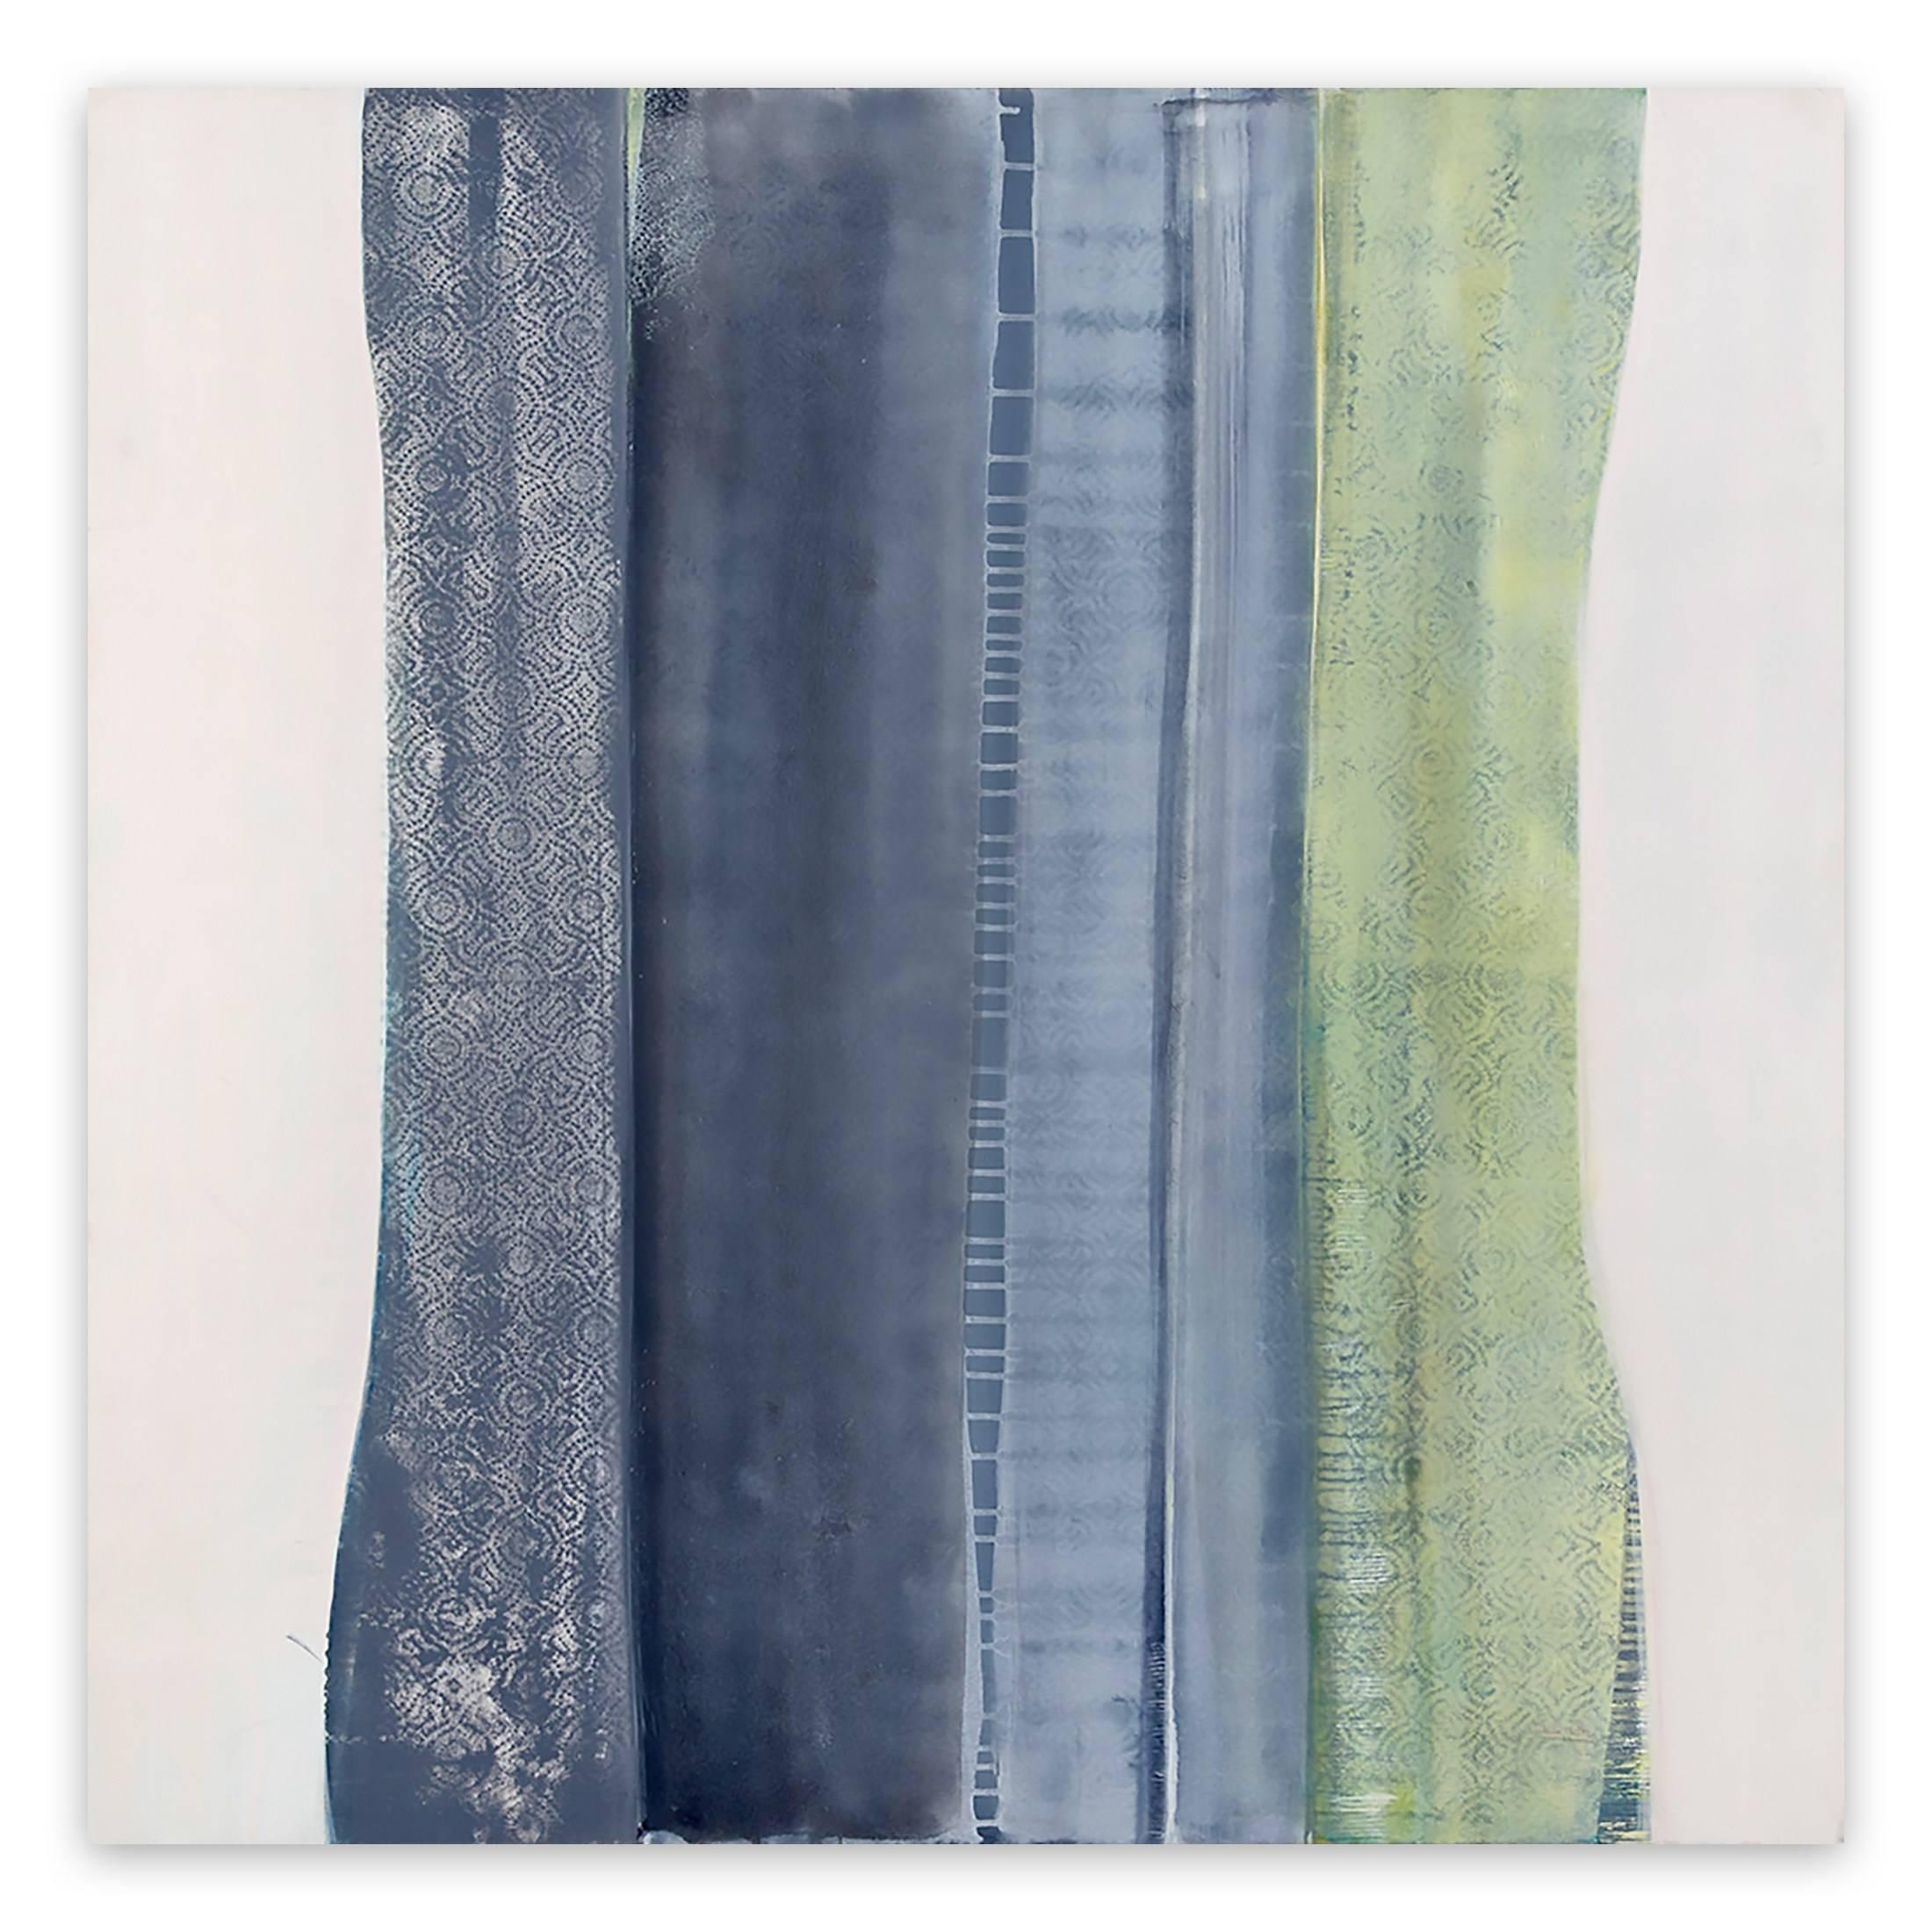 Pillar (Abstract Painting)

Acrylic on canvas - Unframed

The textured appearance of her paintings emanates from the intervention of common household products such as paper towels during the painting process.

Marcy Rosenblat describes herself as